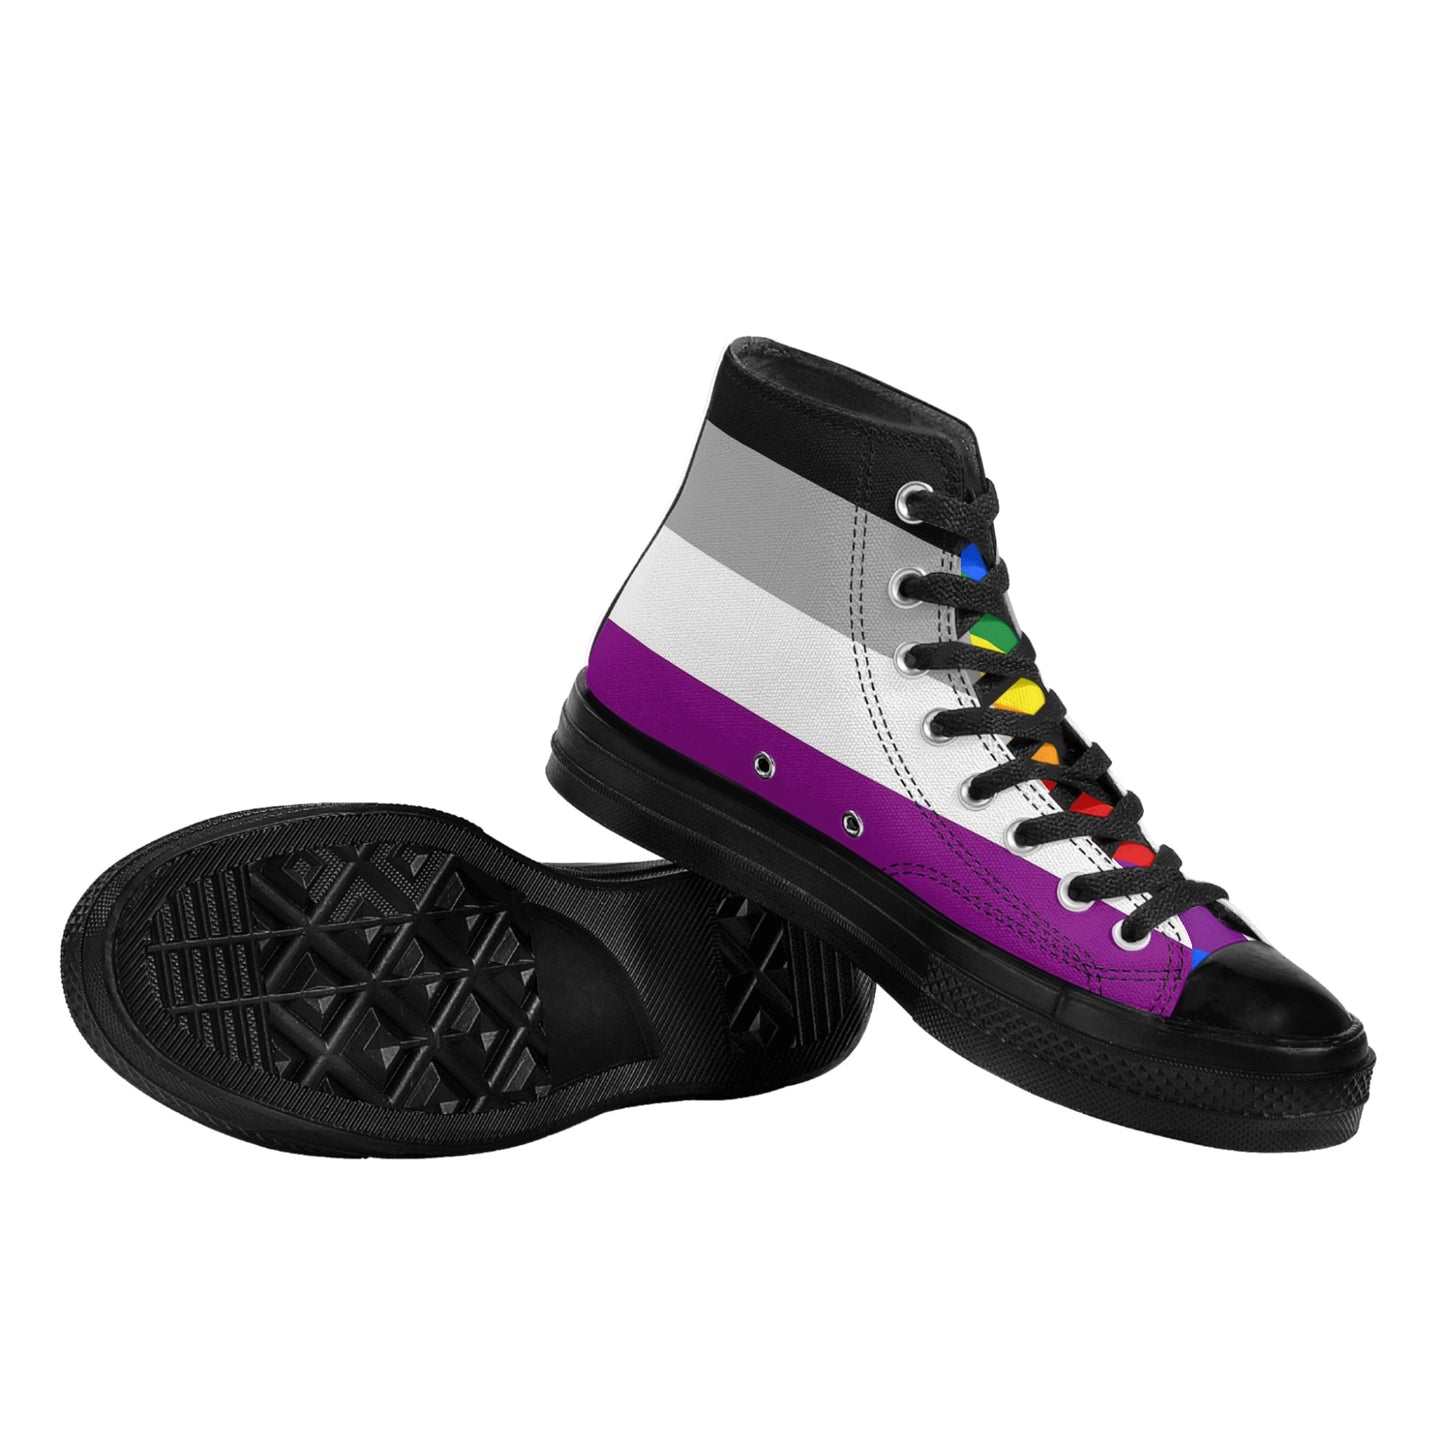 Asexual Pride Collection - Womens Classic Black High Top Canvas Shoes for the LGBTQIA+ community